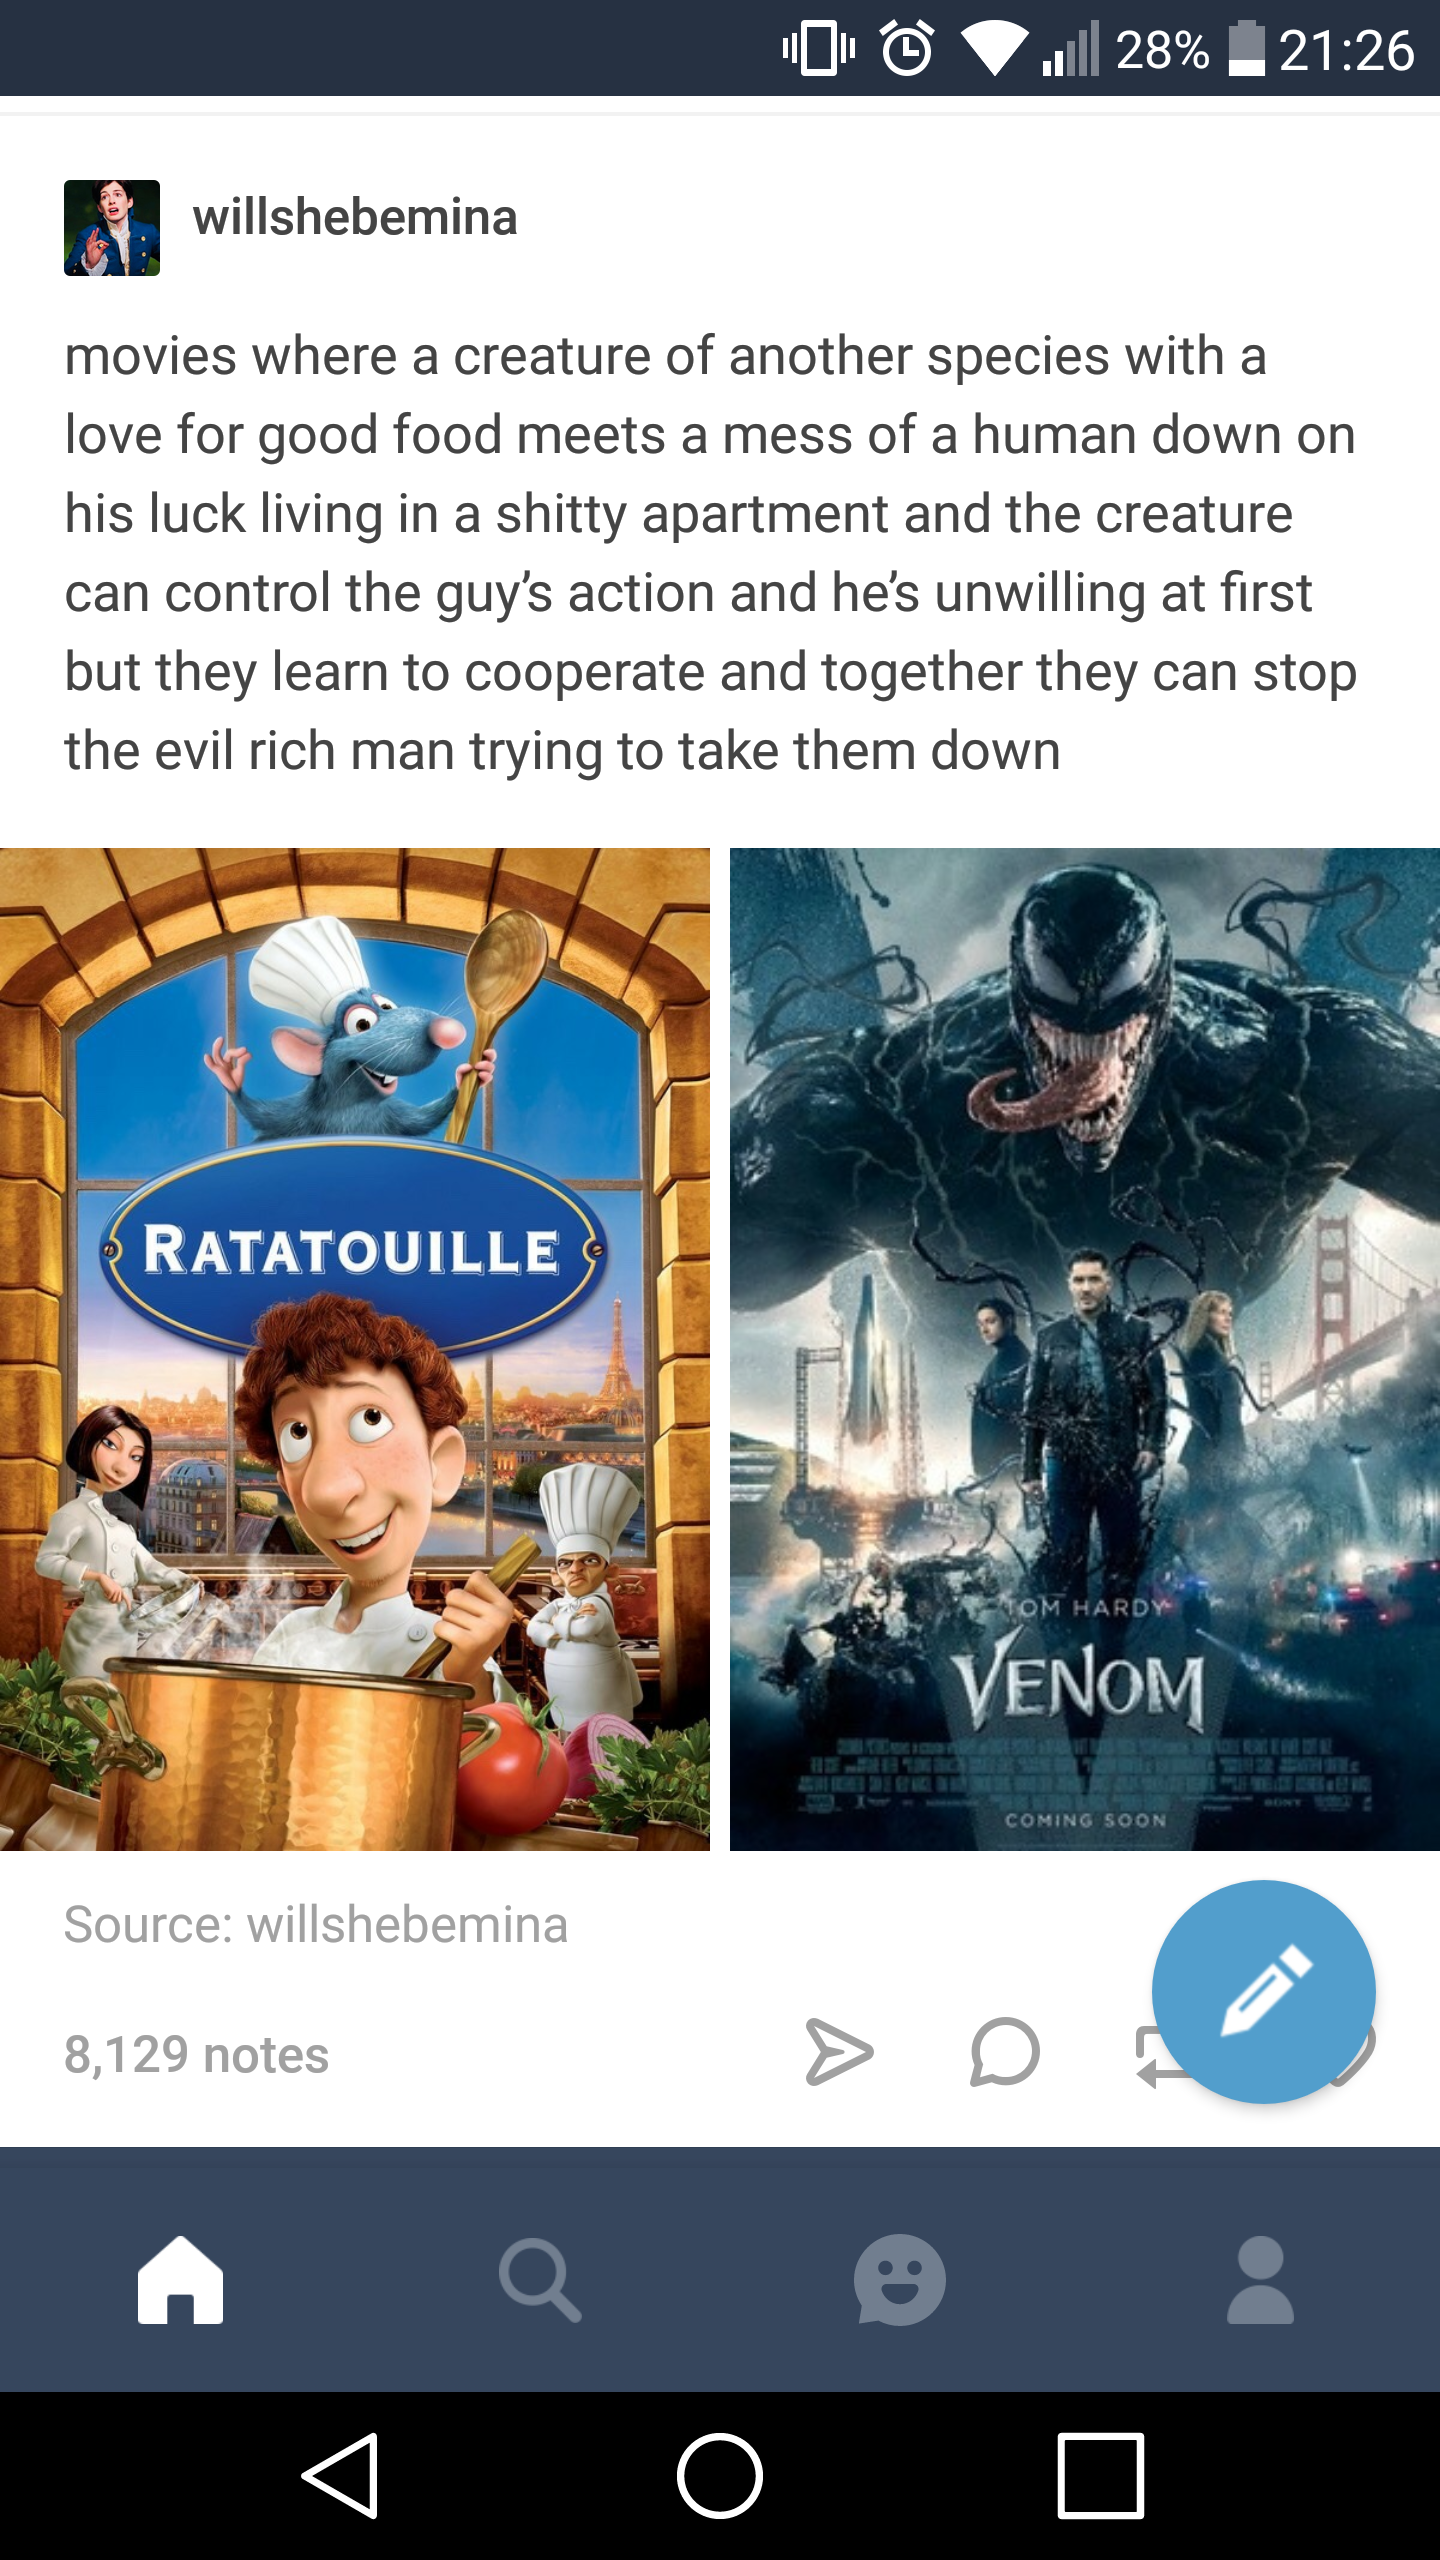 ratatouille and venom same movie - 00 .28% willshebemina movies where a creature of another species with a love for good food meets a mess of a human down on his luck living in a shitty apartment and the creature can control the guy's action and he's unwi